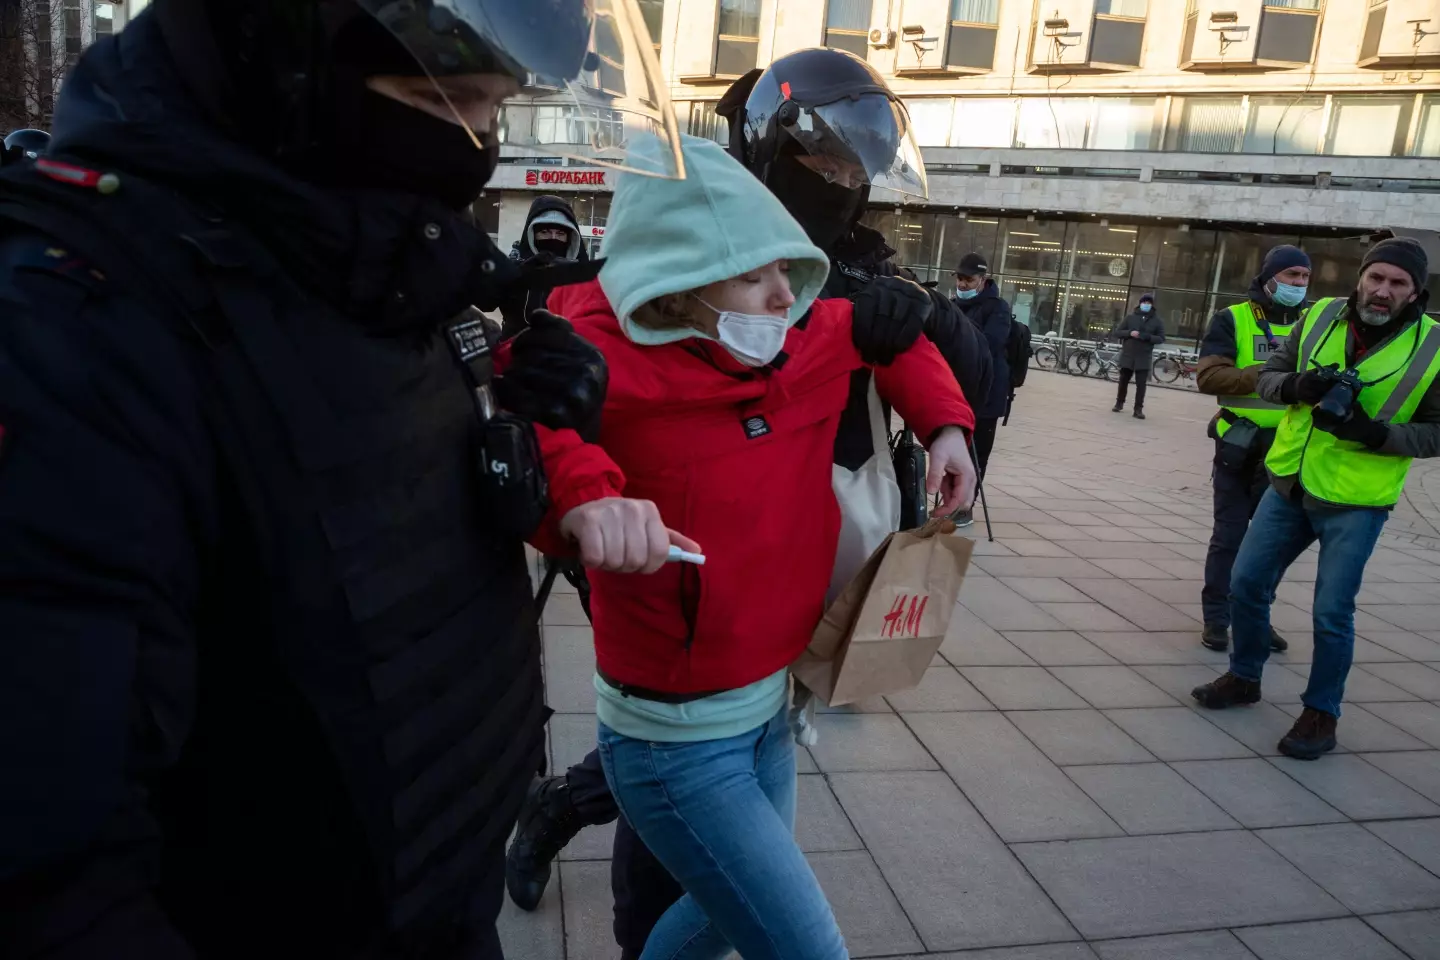 Russian protester arrested by police (Alamy)